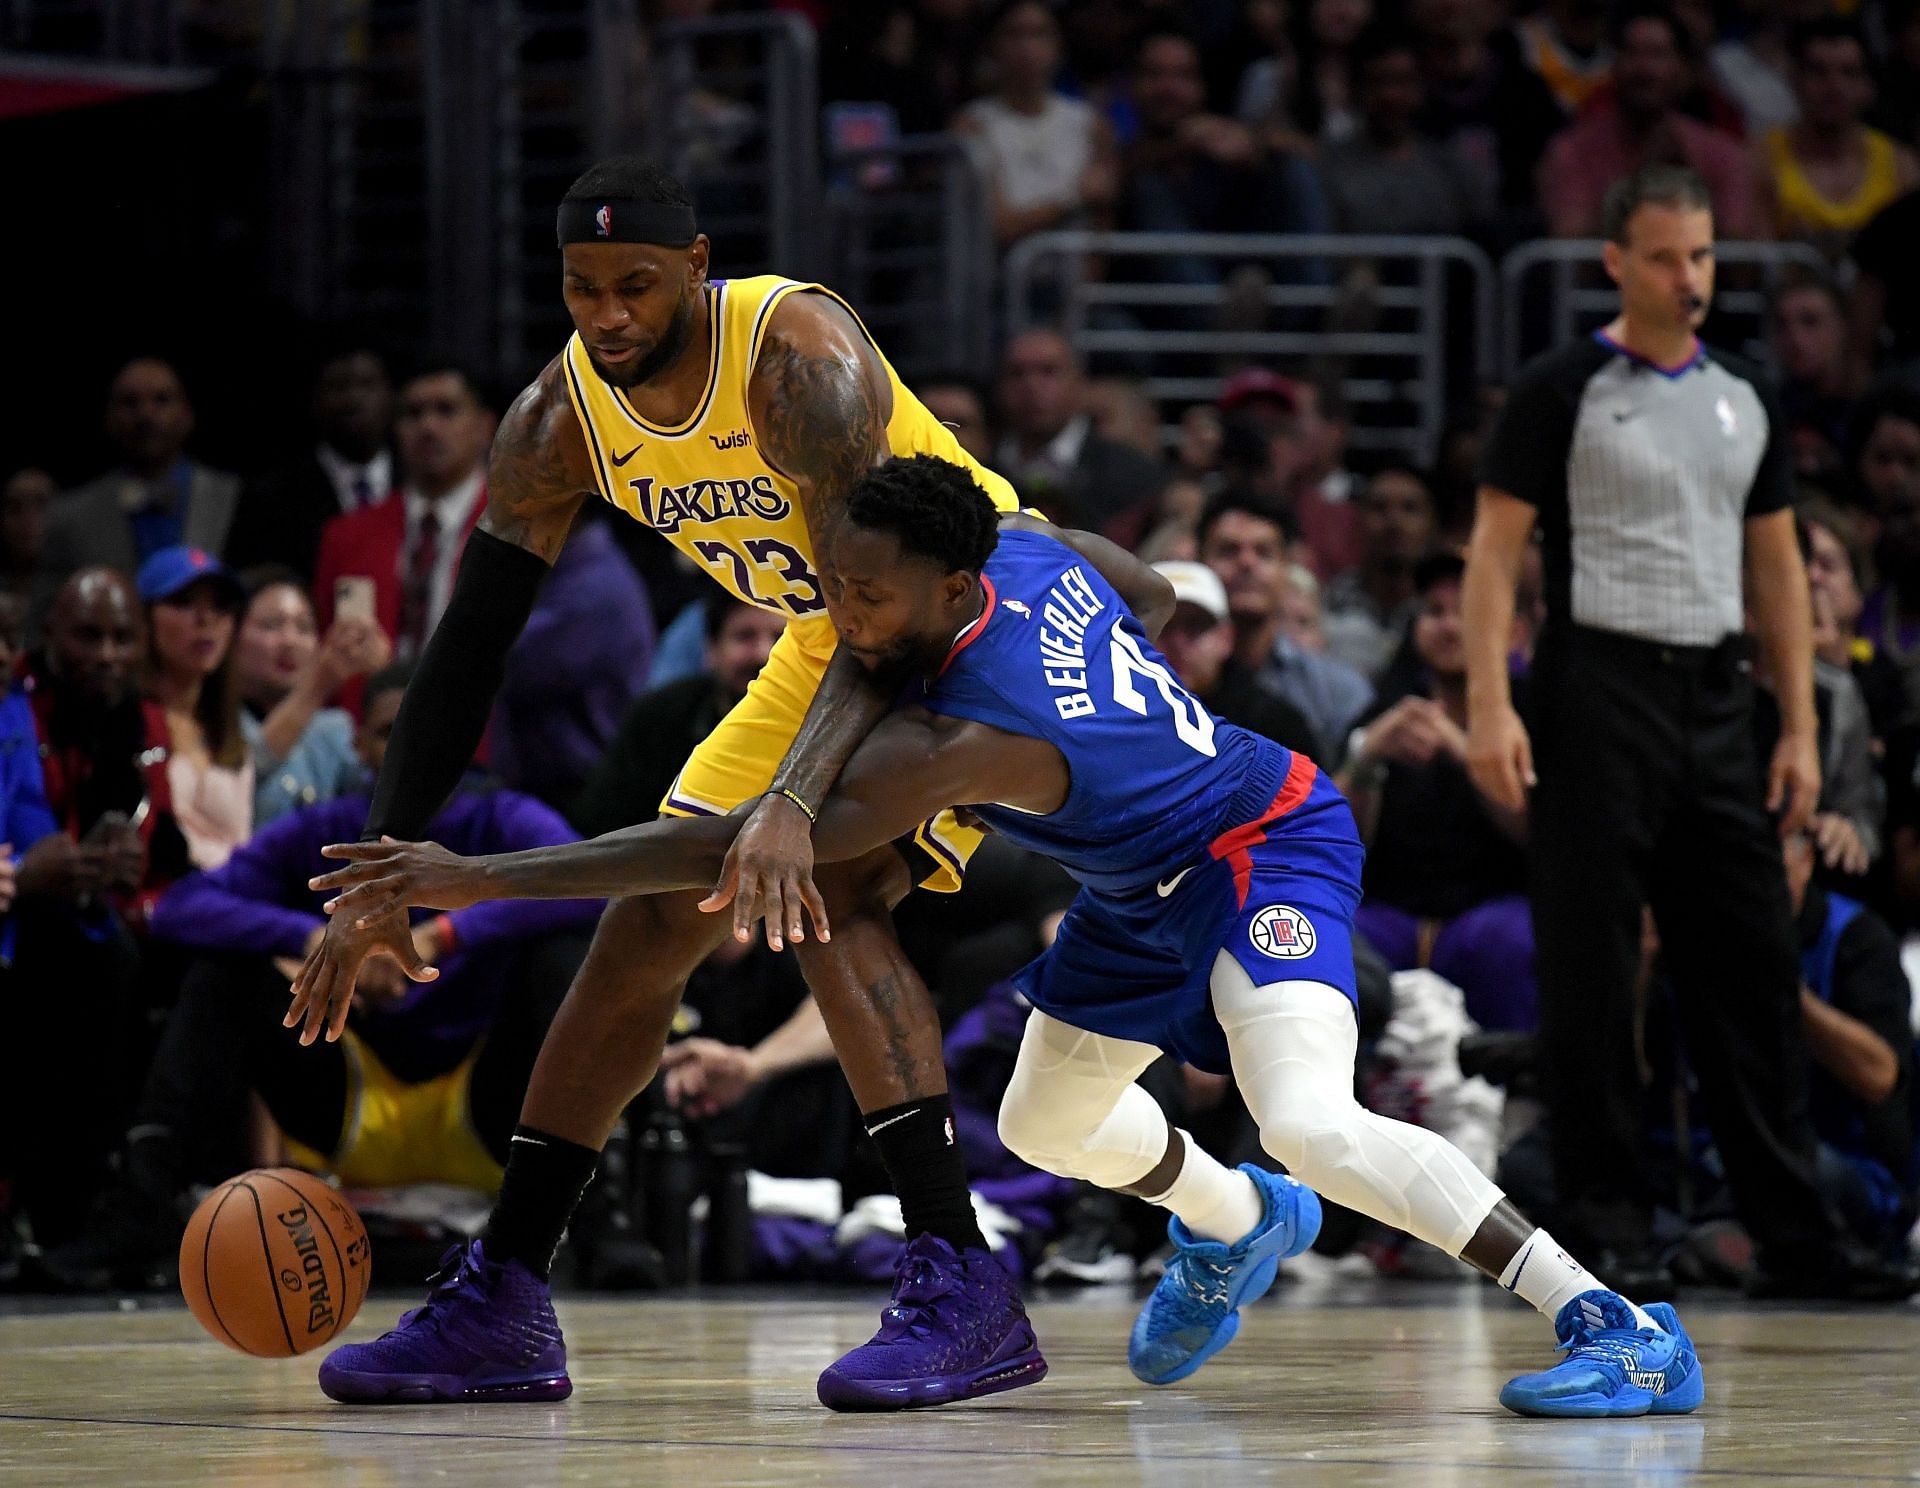 Patrick Beverley and LeBron James in action during LA Lakers versus Los Angeles Clippers.